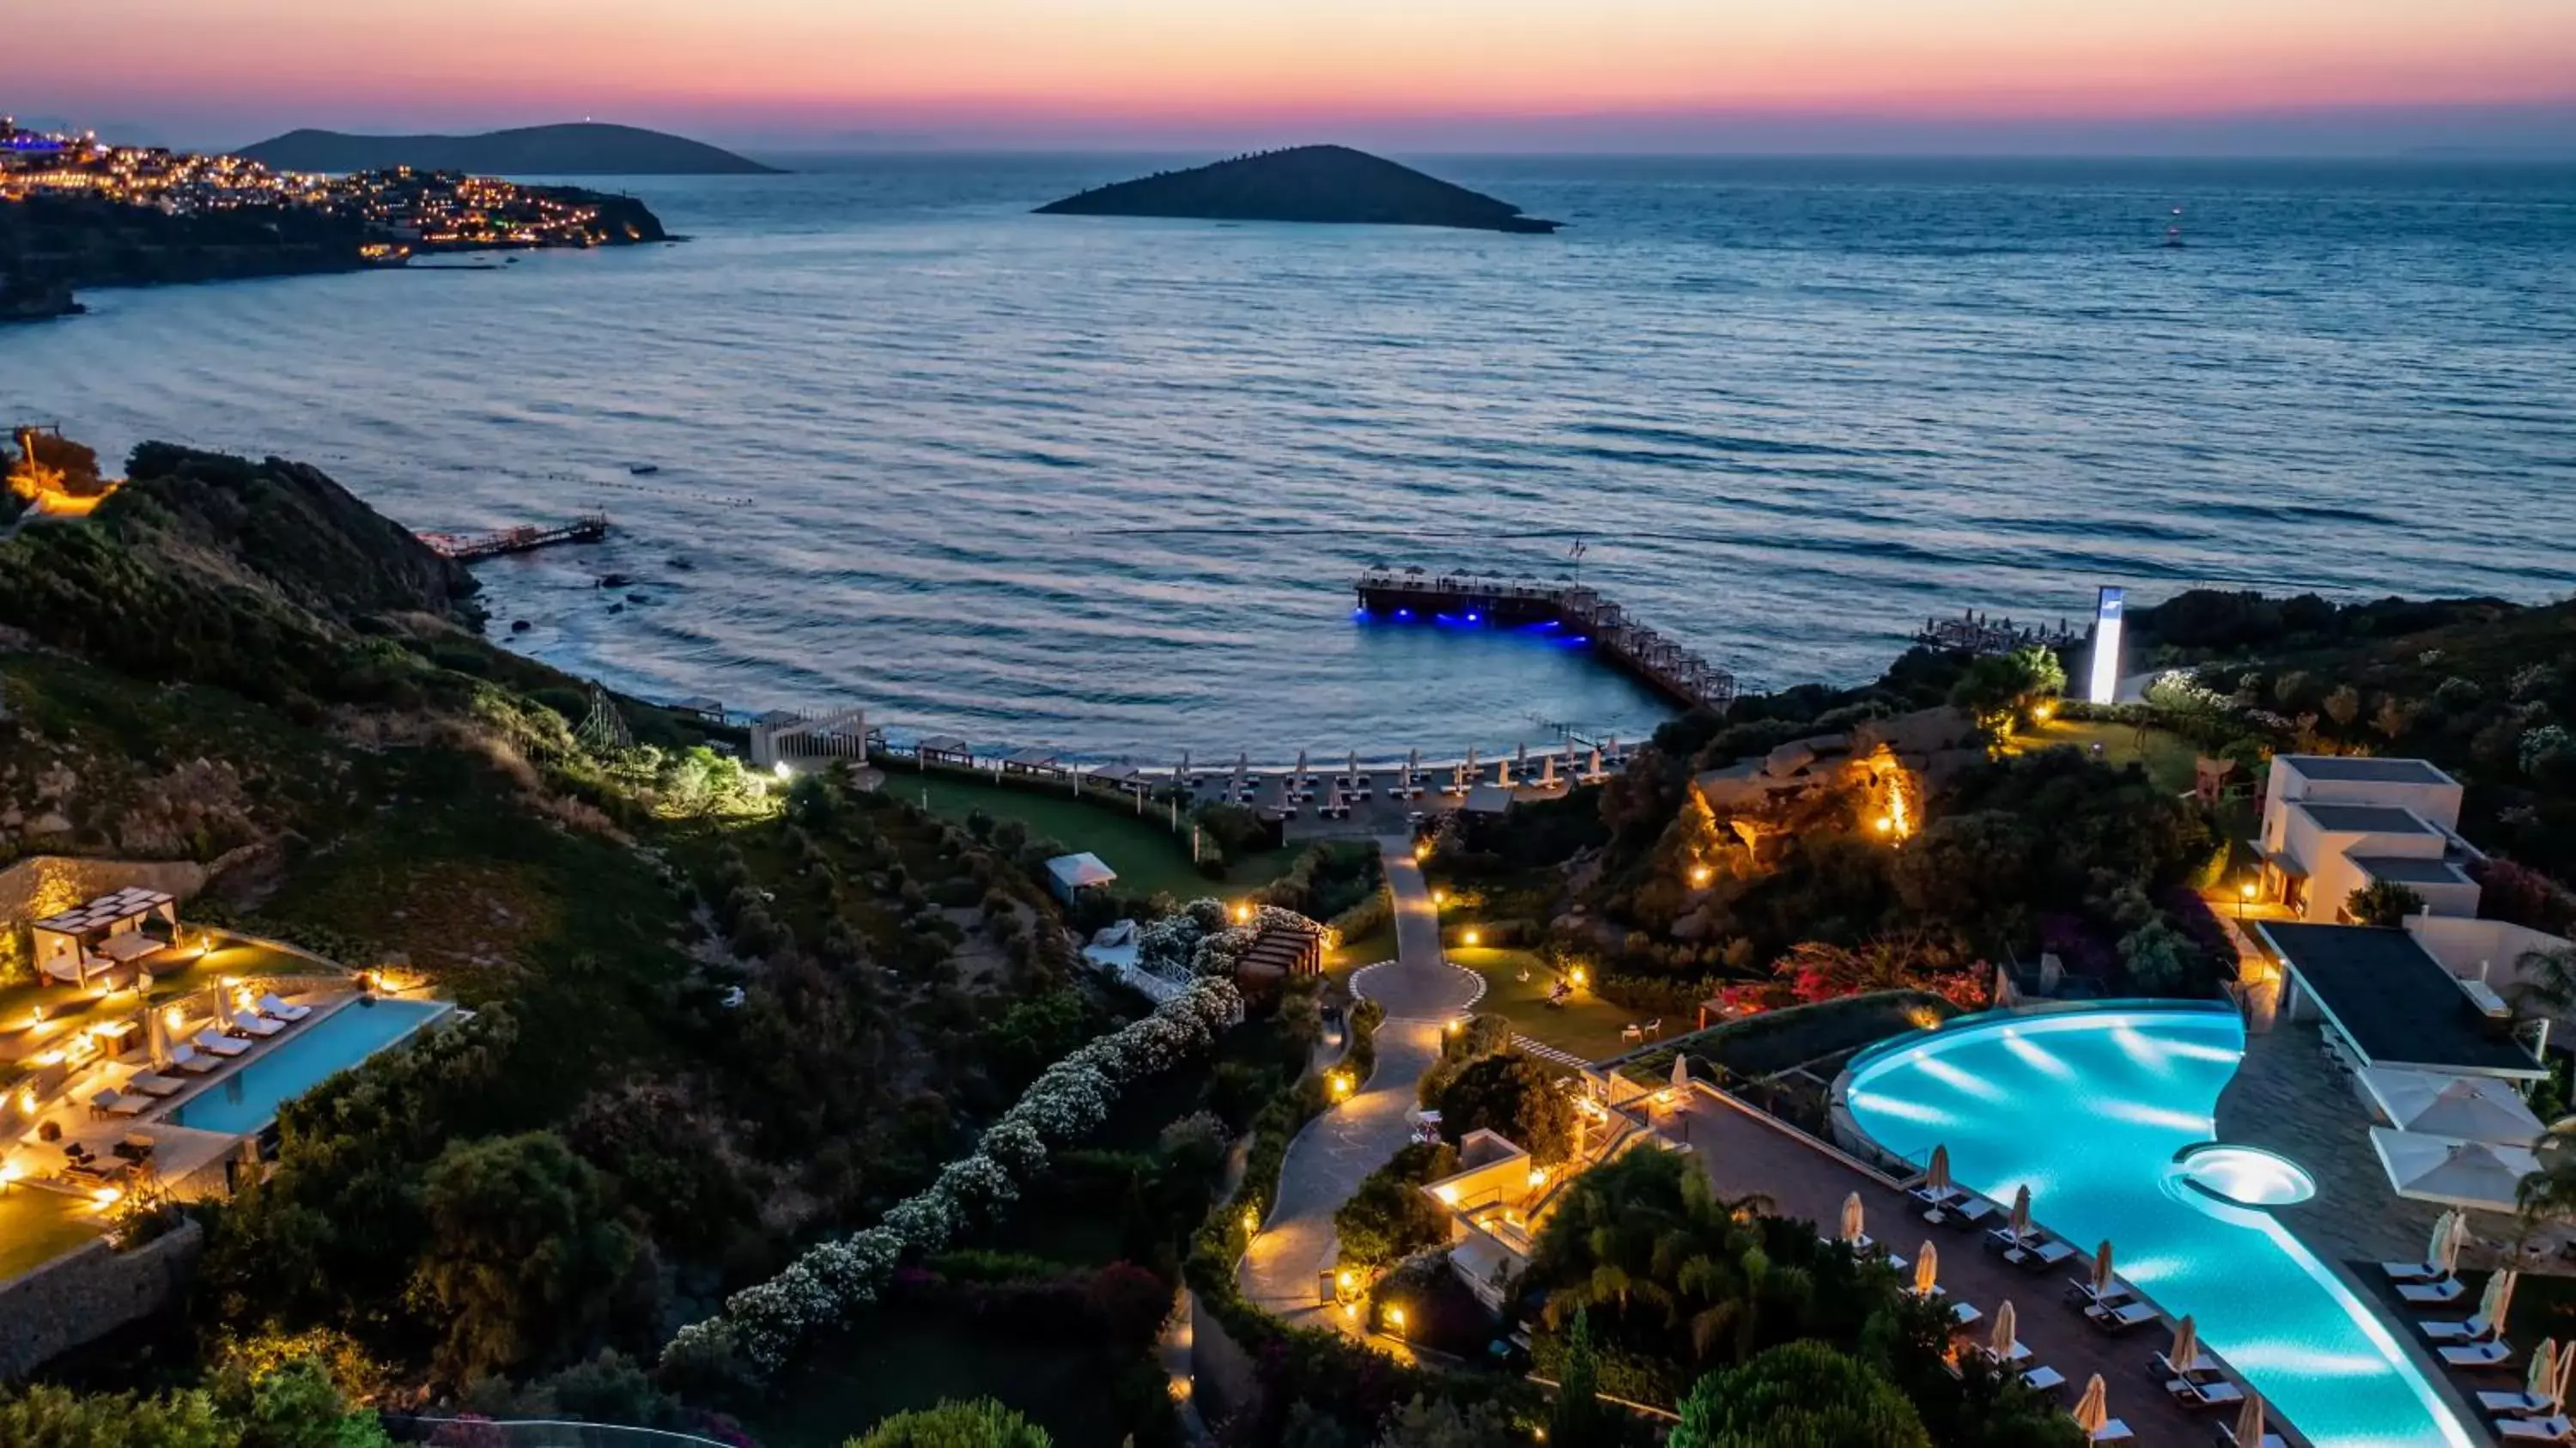 Natural landscape, Pool View in Sirene Luxury Hotel Bodrum